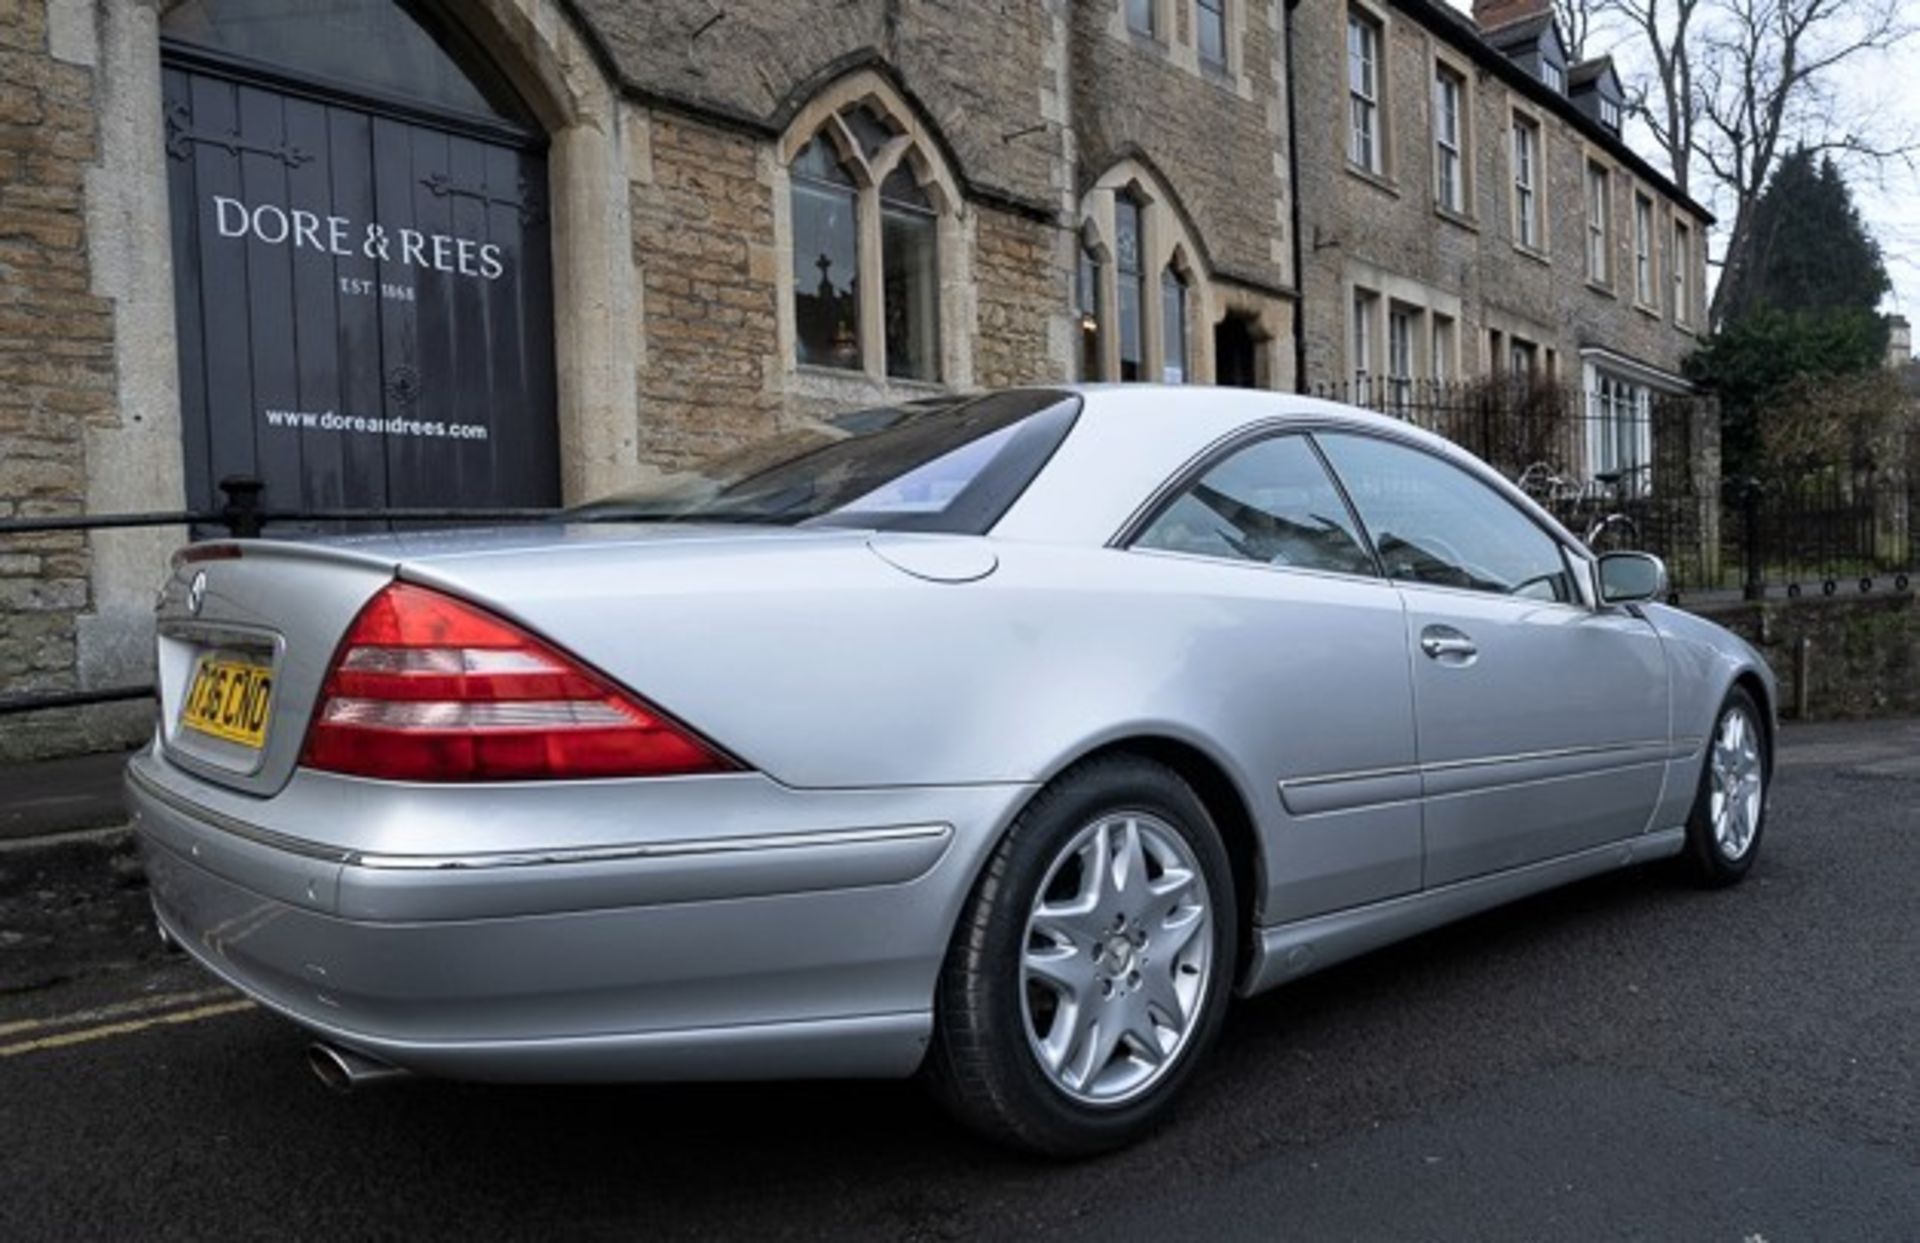 2000 Mercedes CL500 Coupe - Image 3 of 13